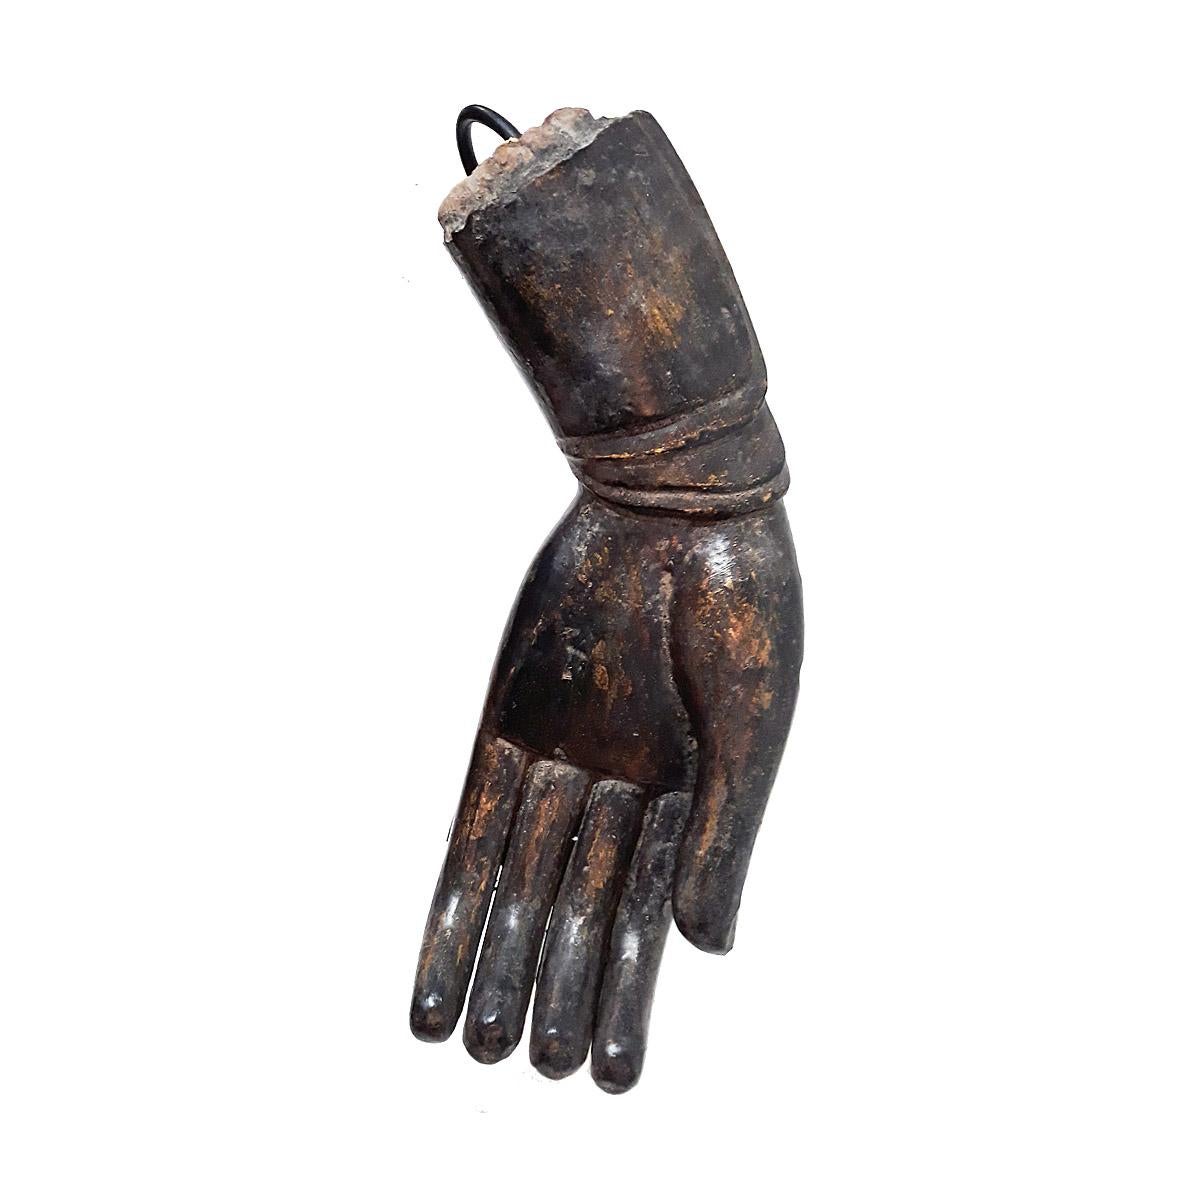 A wooden sculpture of a Buddha hand in a traditional gesture known as
Verada Mudra, meaning Compassion / Sincerity, early 20th century.

Once part of a large Buddha sculpture, this fragment was reclaimed and mounted on a black metal stand as a